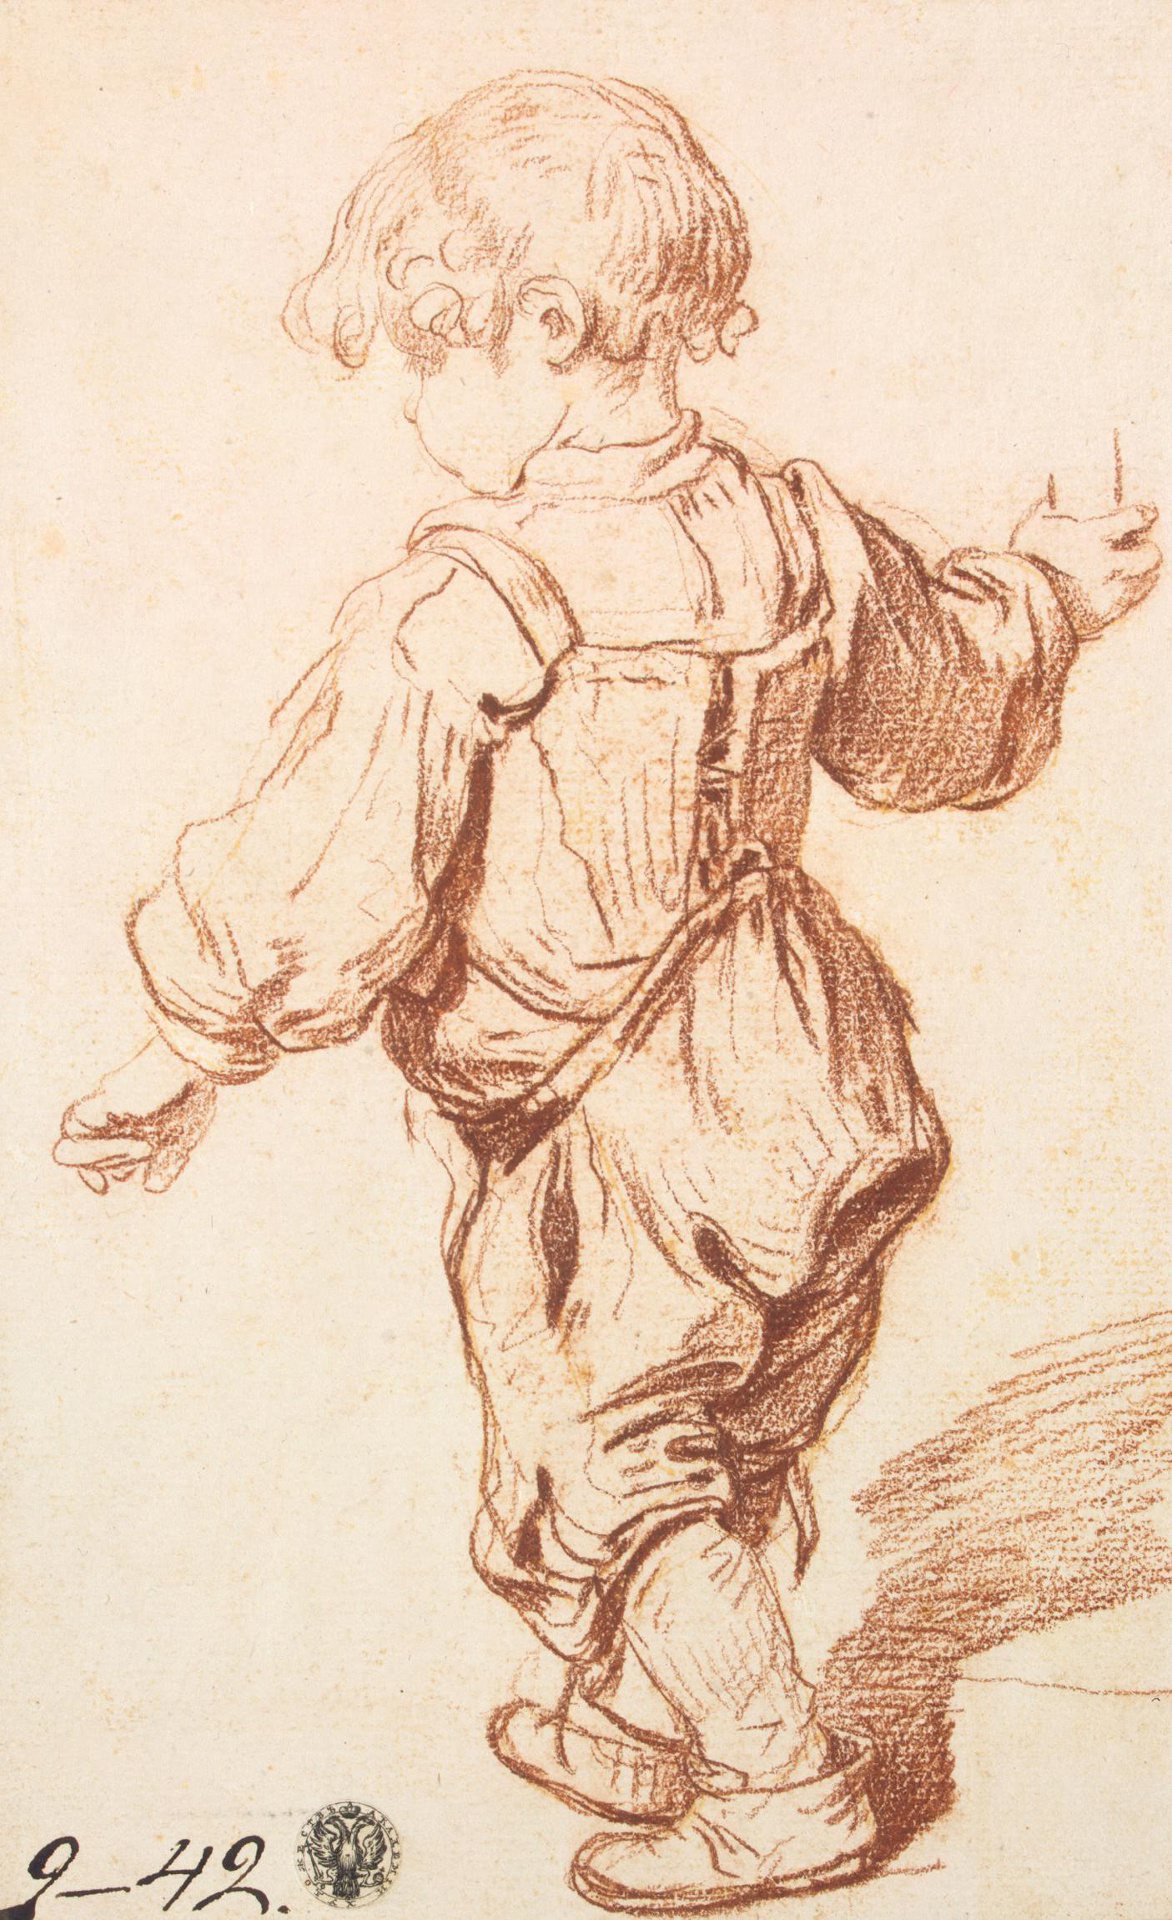 A sketch depicting the back of a young boy walking. He wears loose and baggy clothing as he holds onto an unknown object with his right hand. His face is also turned away.  The sketch is drawn with brown colored strokes.